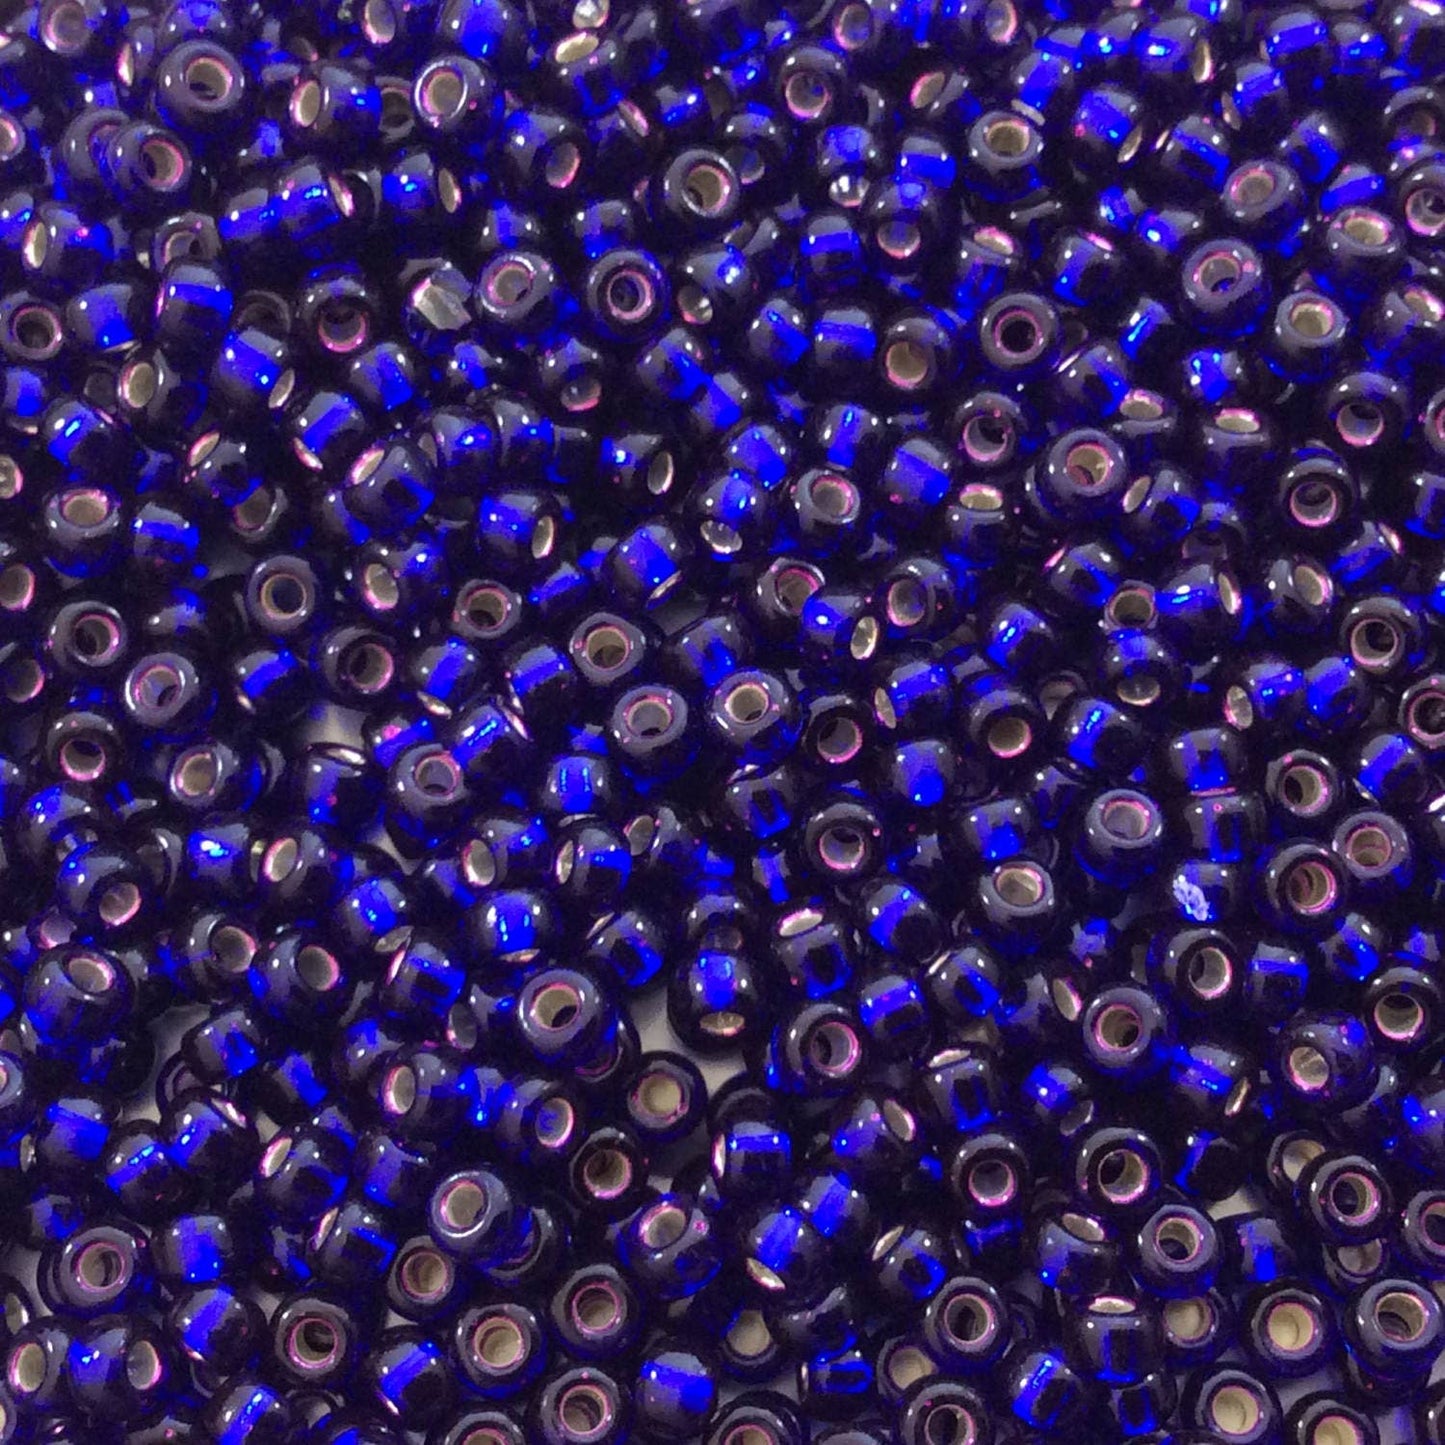 Size 8/0 Glossy Finish Silver Lined Violet Genuine Miyuki Glass Seed Beads - Sold by 22 Gram Tubes (Approx. 900 Beads per Tube) - (8-91427)